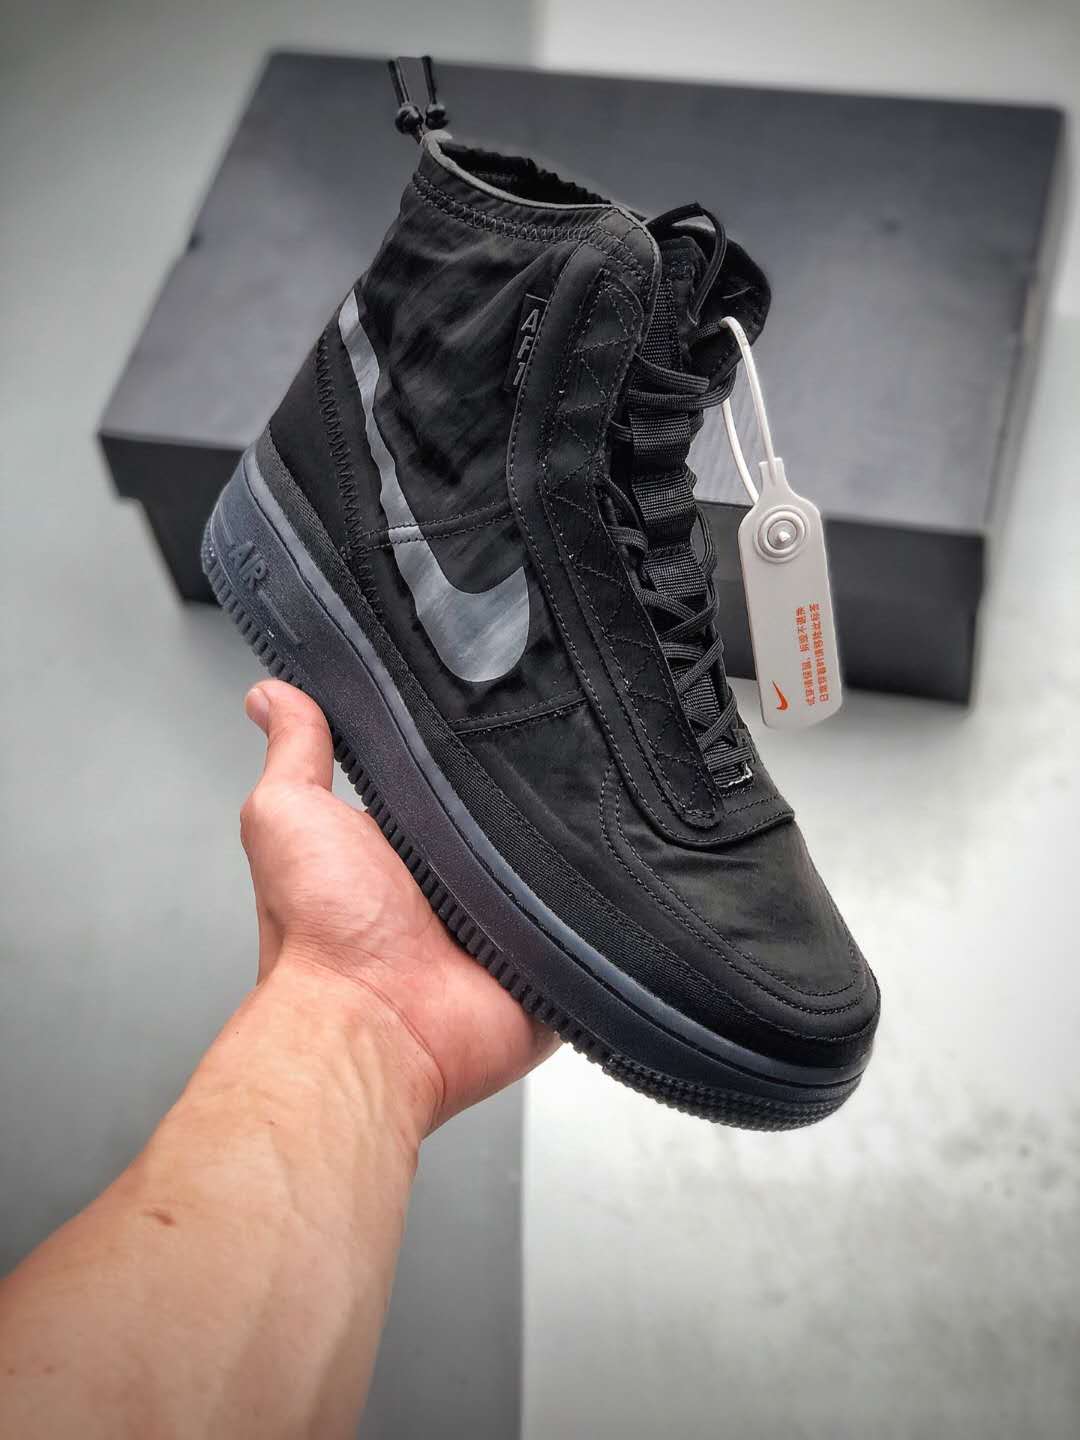 Nike Air Force 1 High Shell 'Black' Sneakers BQ6096-001 | Limited Edition & Free Shipping